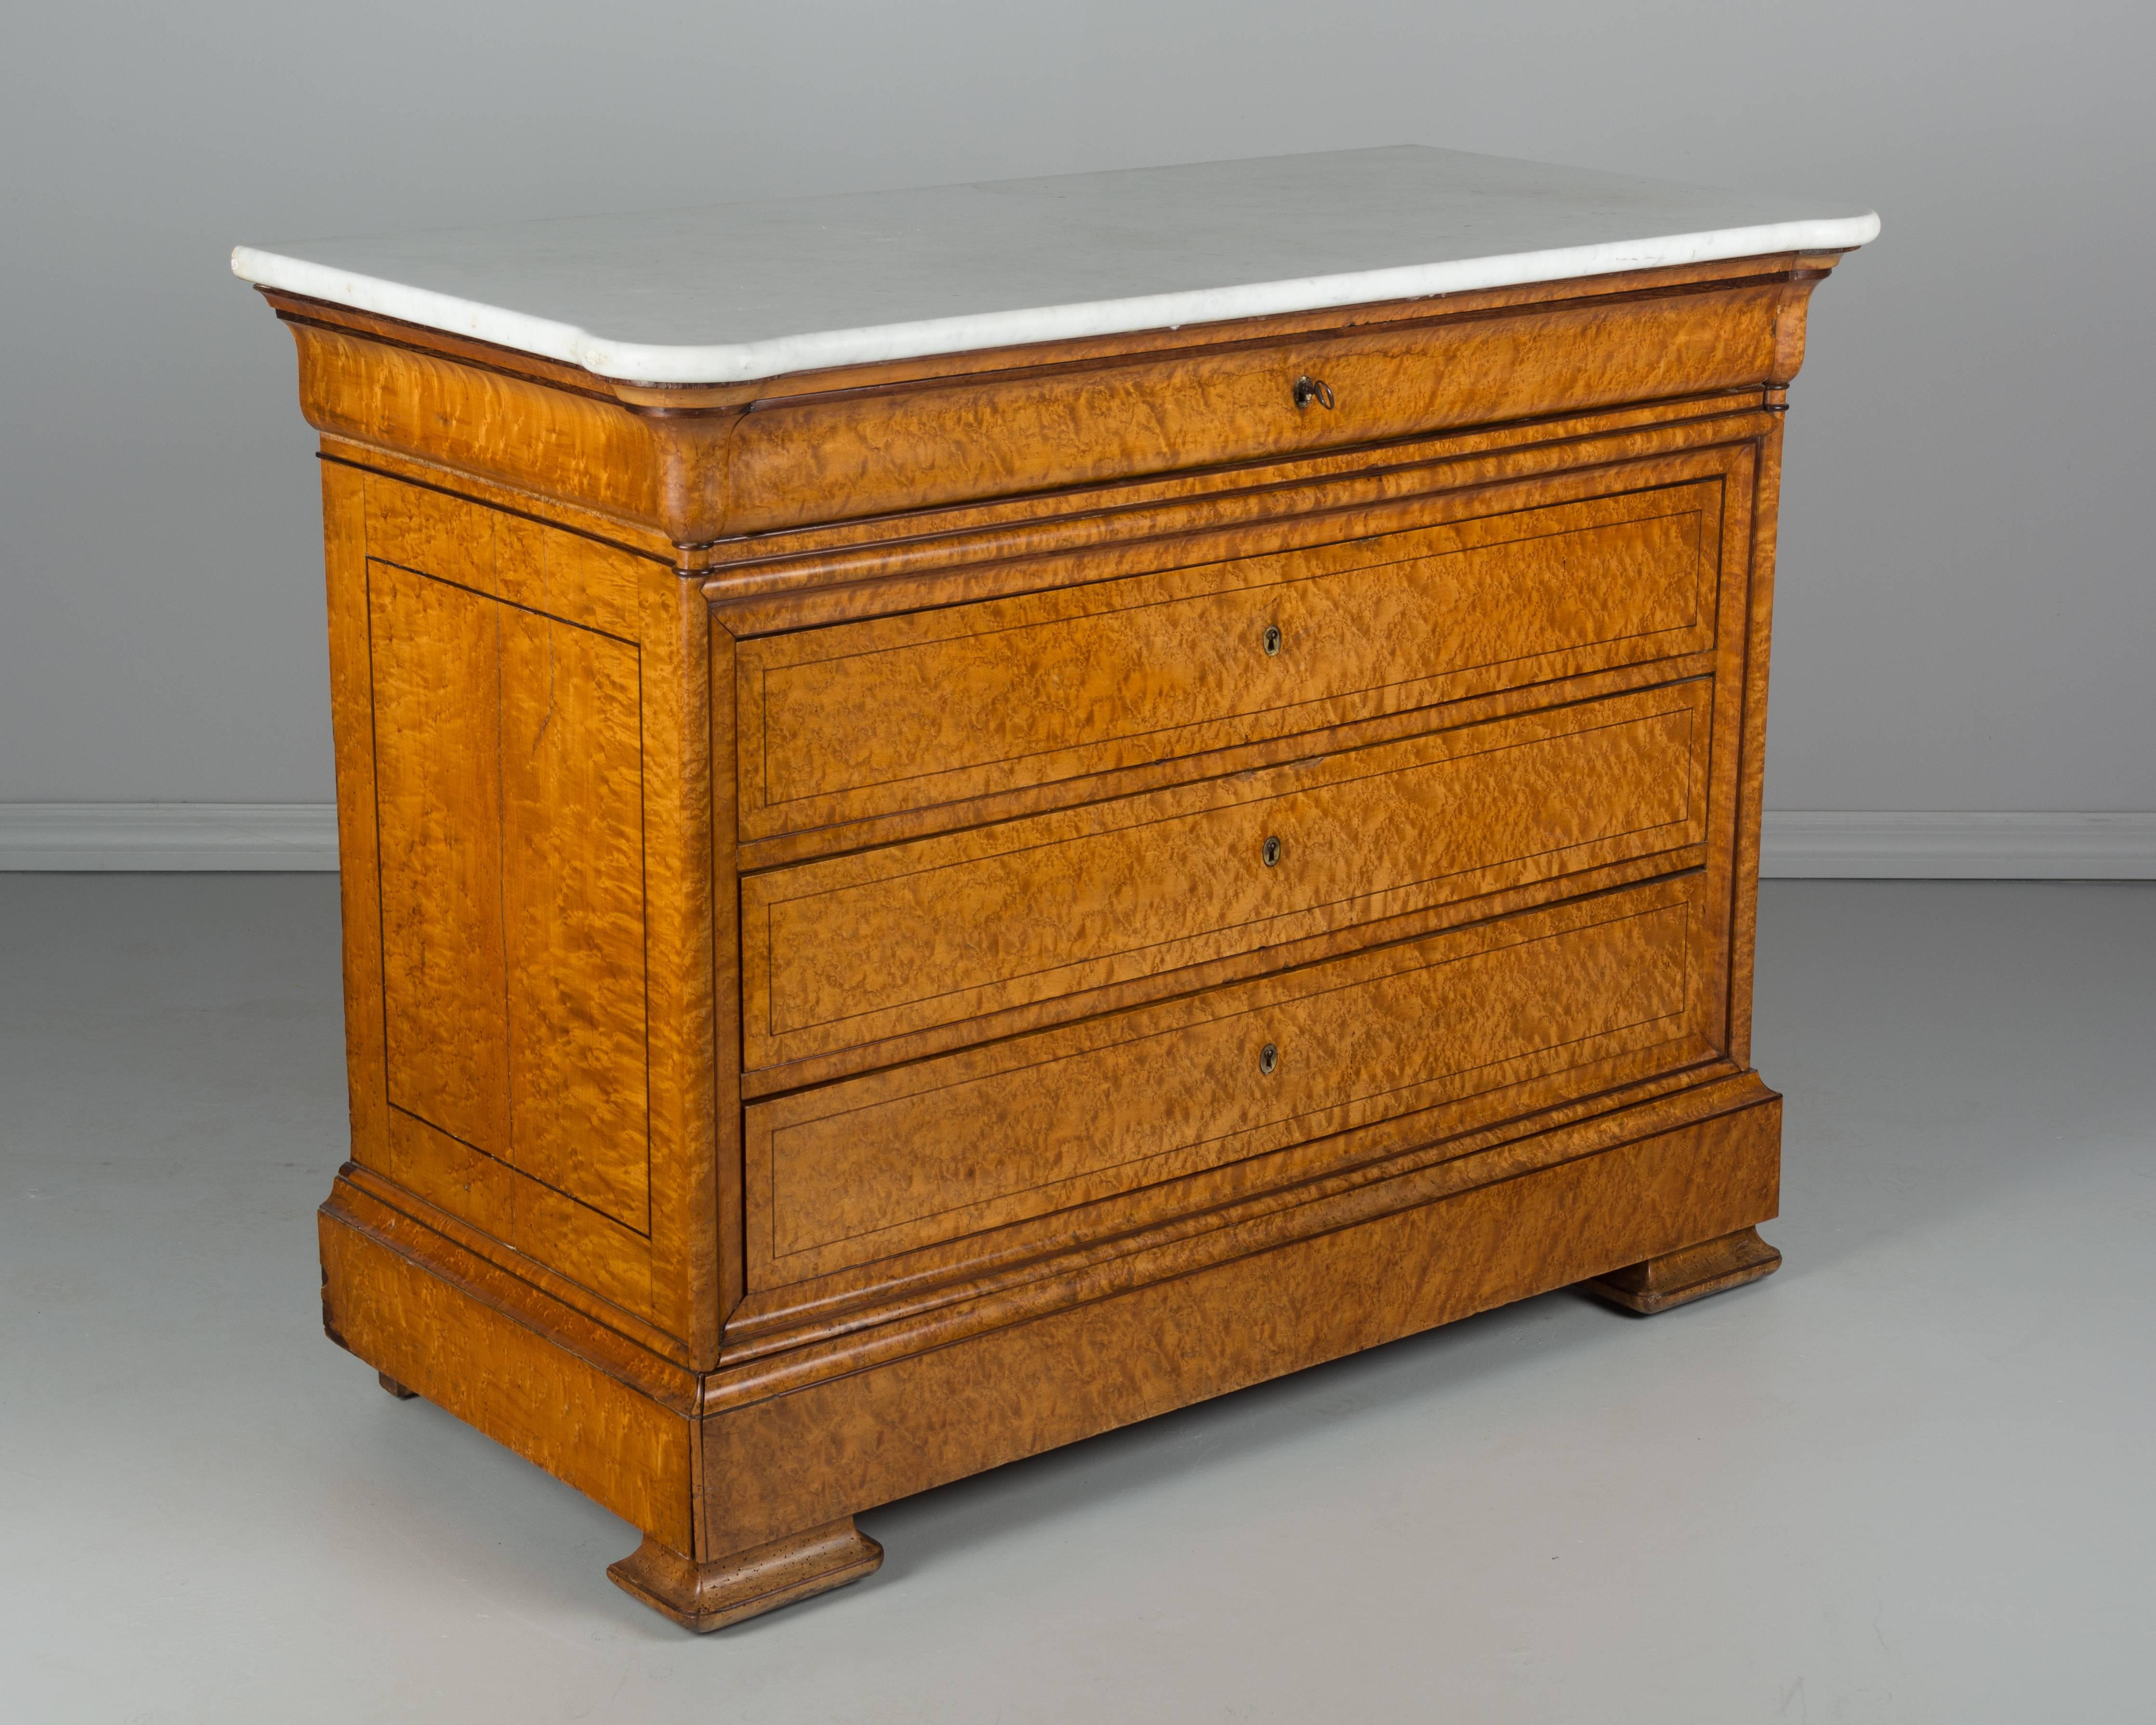 An early 19th century French Charles X commode, or chest of drawers, made of veneer of bird's-eye maple over solid oak with mahogany trim. Five dovetailed drawers provide ample storage with working locks and one key. Two brass escutcheons are